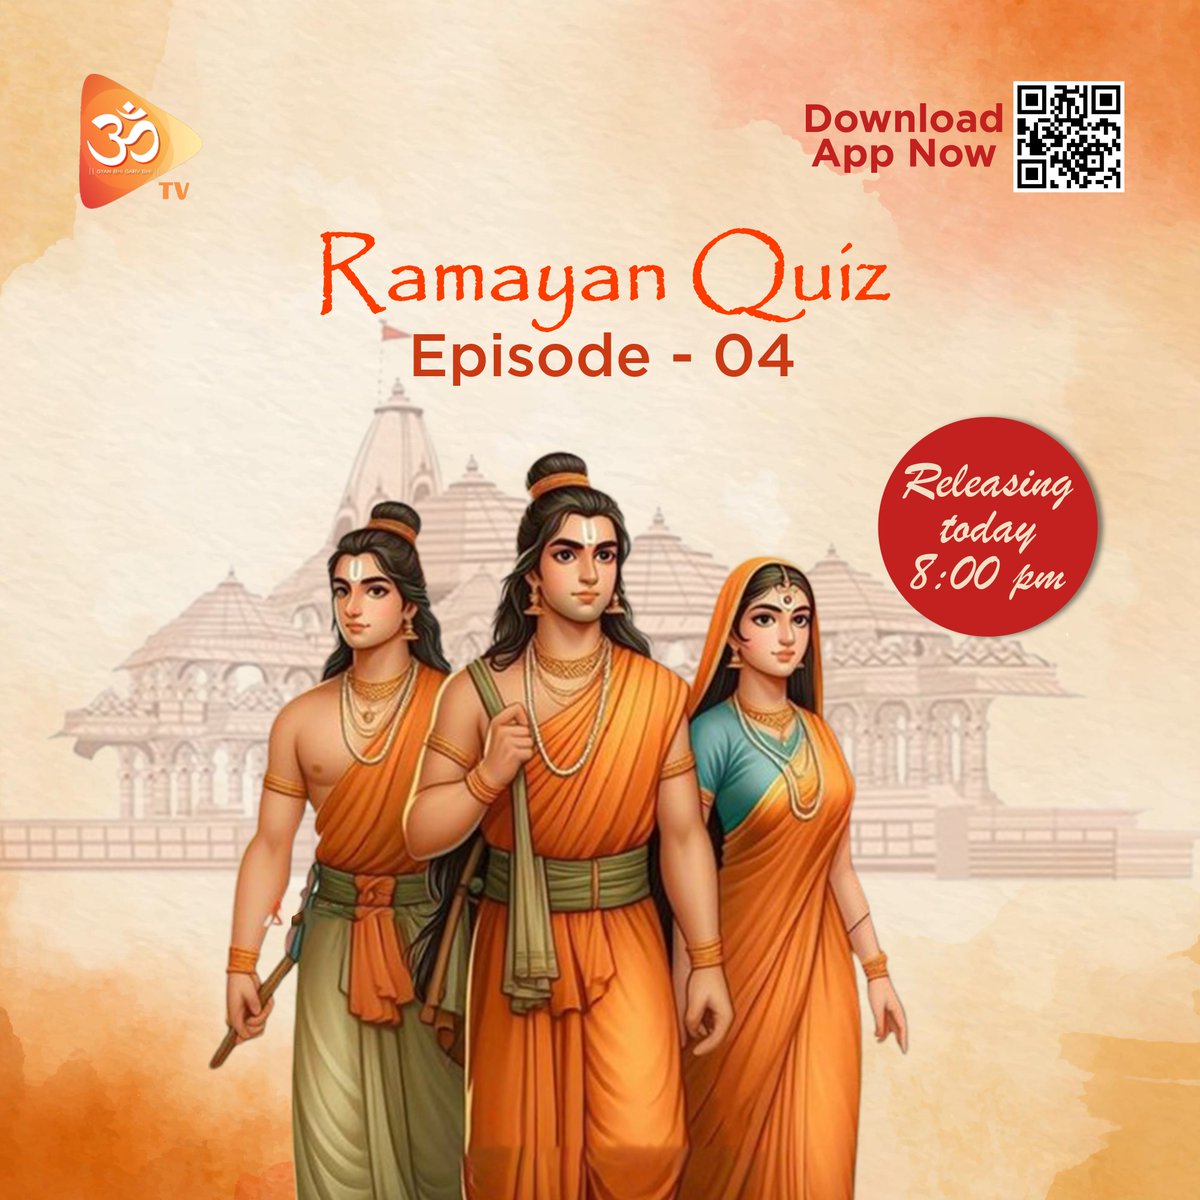 Episode-4 of the Ramayan Quiz! 📜✨
Today Be Ready at 8PM To Watch Ramayan Quiz EP4.

Download the OMTV App Now to Watch Latest Shows 🕉🚩

#WatchNow #RamayanaQuiz #OMTV #ramayana #newshow #Ram #KnowTheTruth #indianhistory #kidsfun